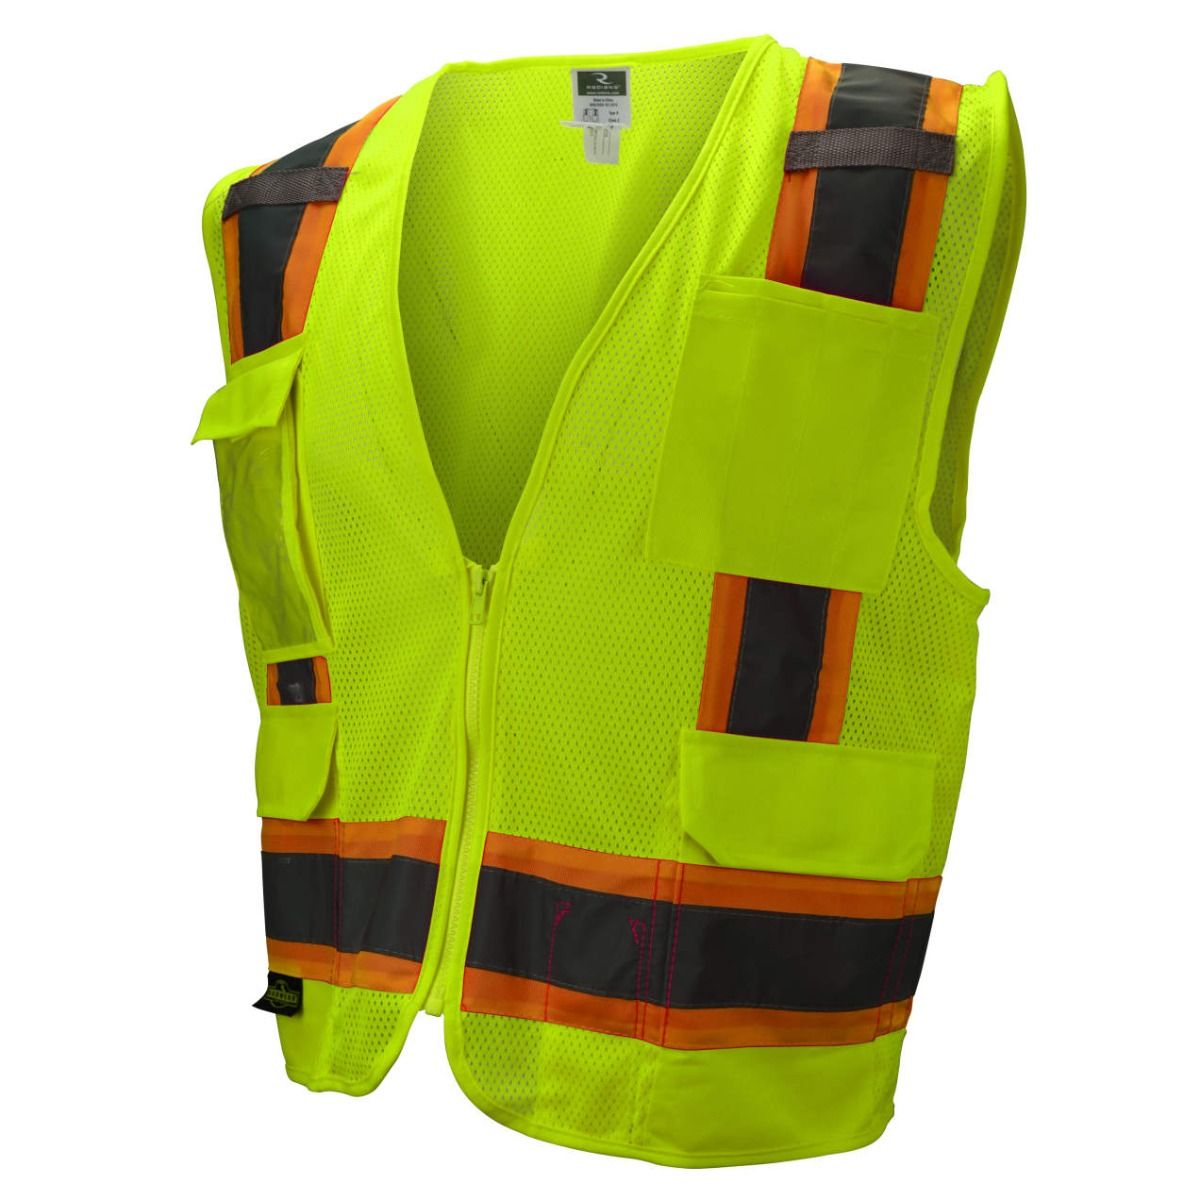 GLO-079 FrogWear HV High-Visibility Mesh Polyester Surveyors Safety Vest 3X-Large Global Glove & Safety Manufacturing GLO-079-3XL 